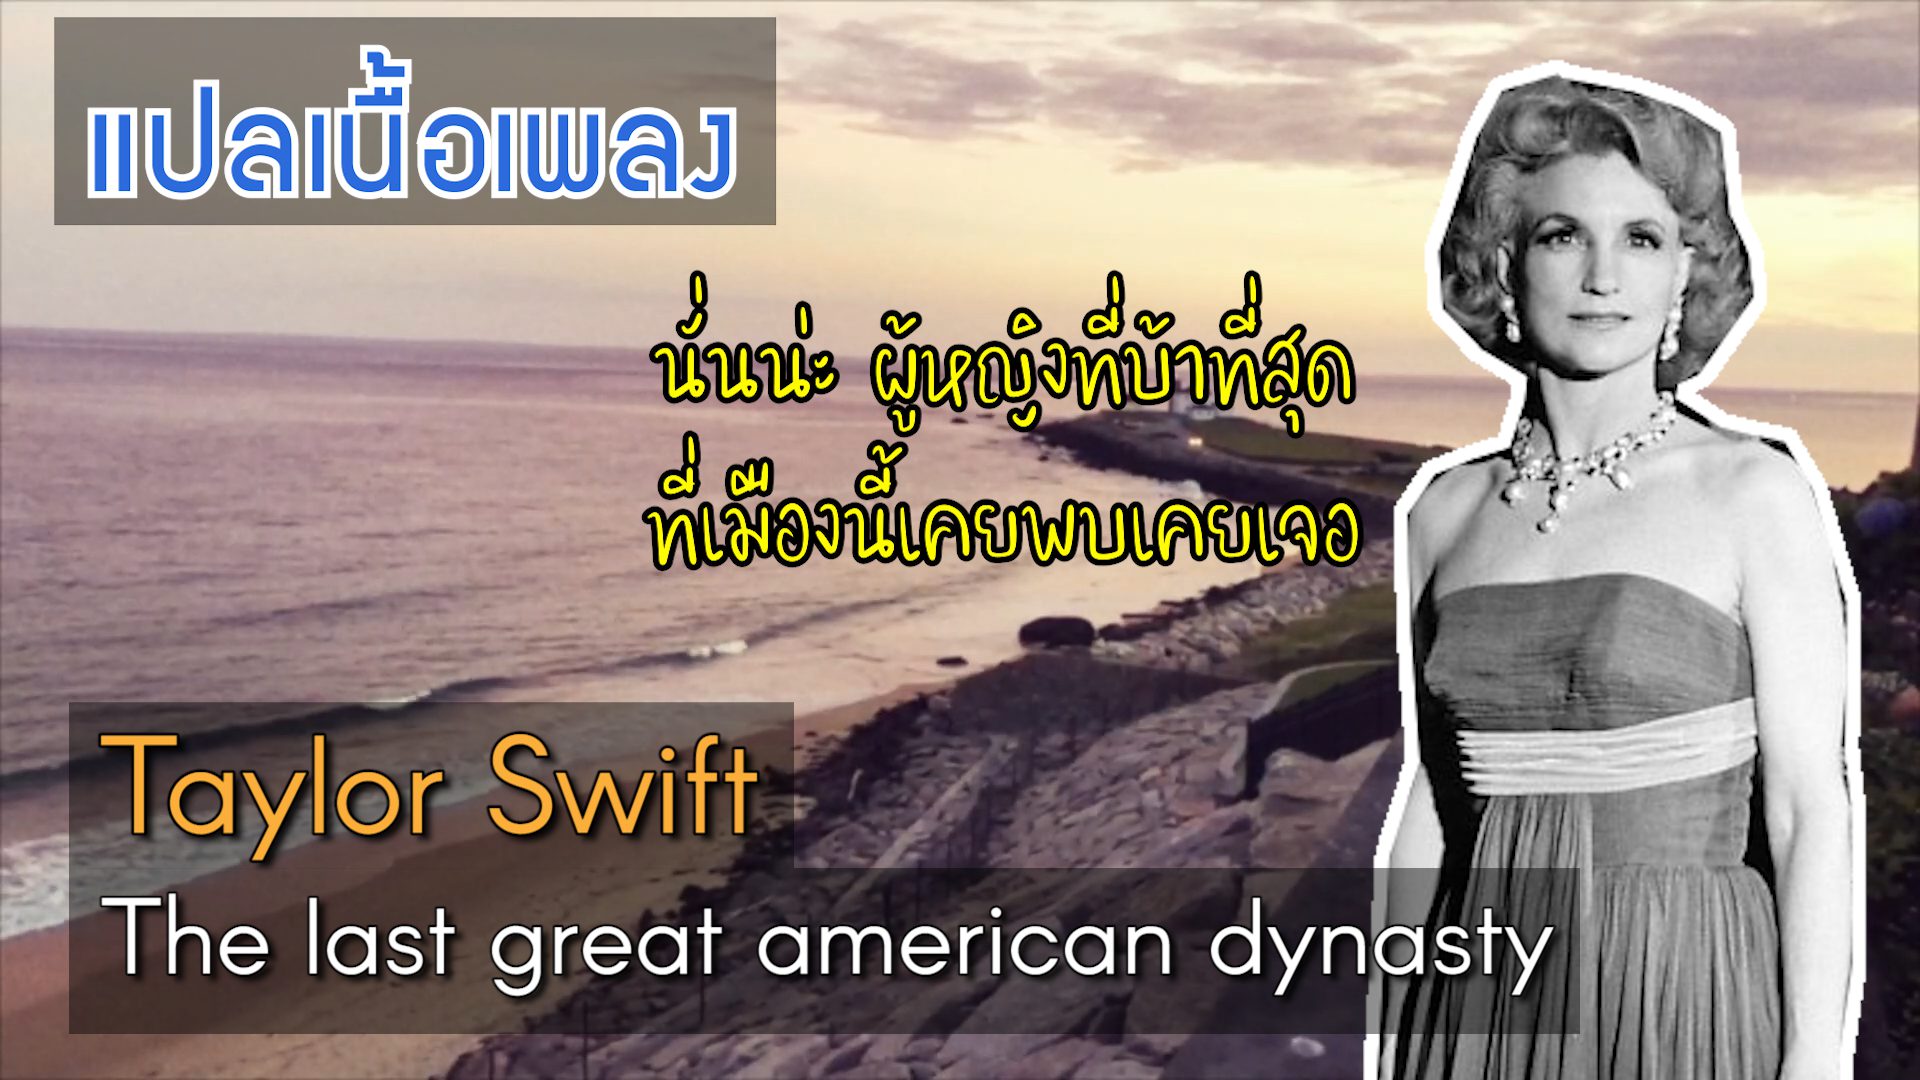 Taylor Swift - the last great american dynasty